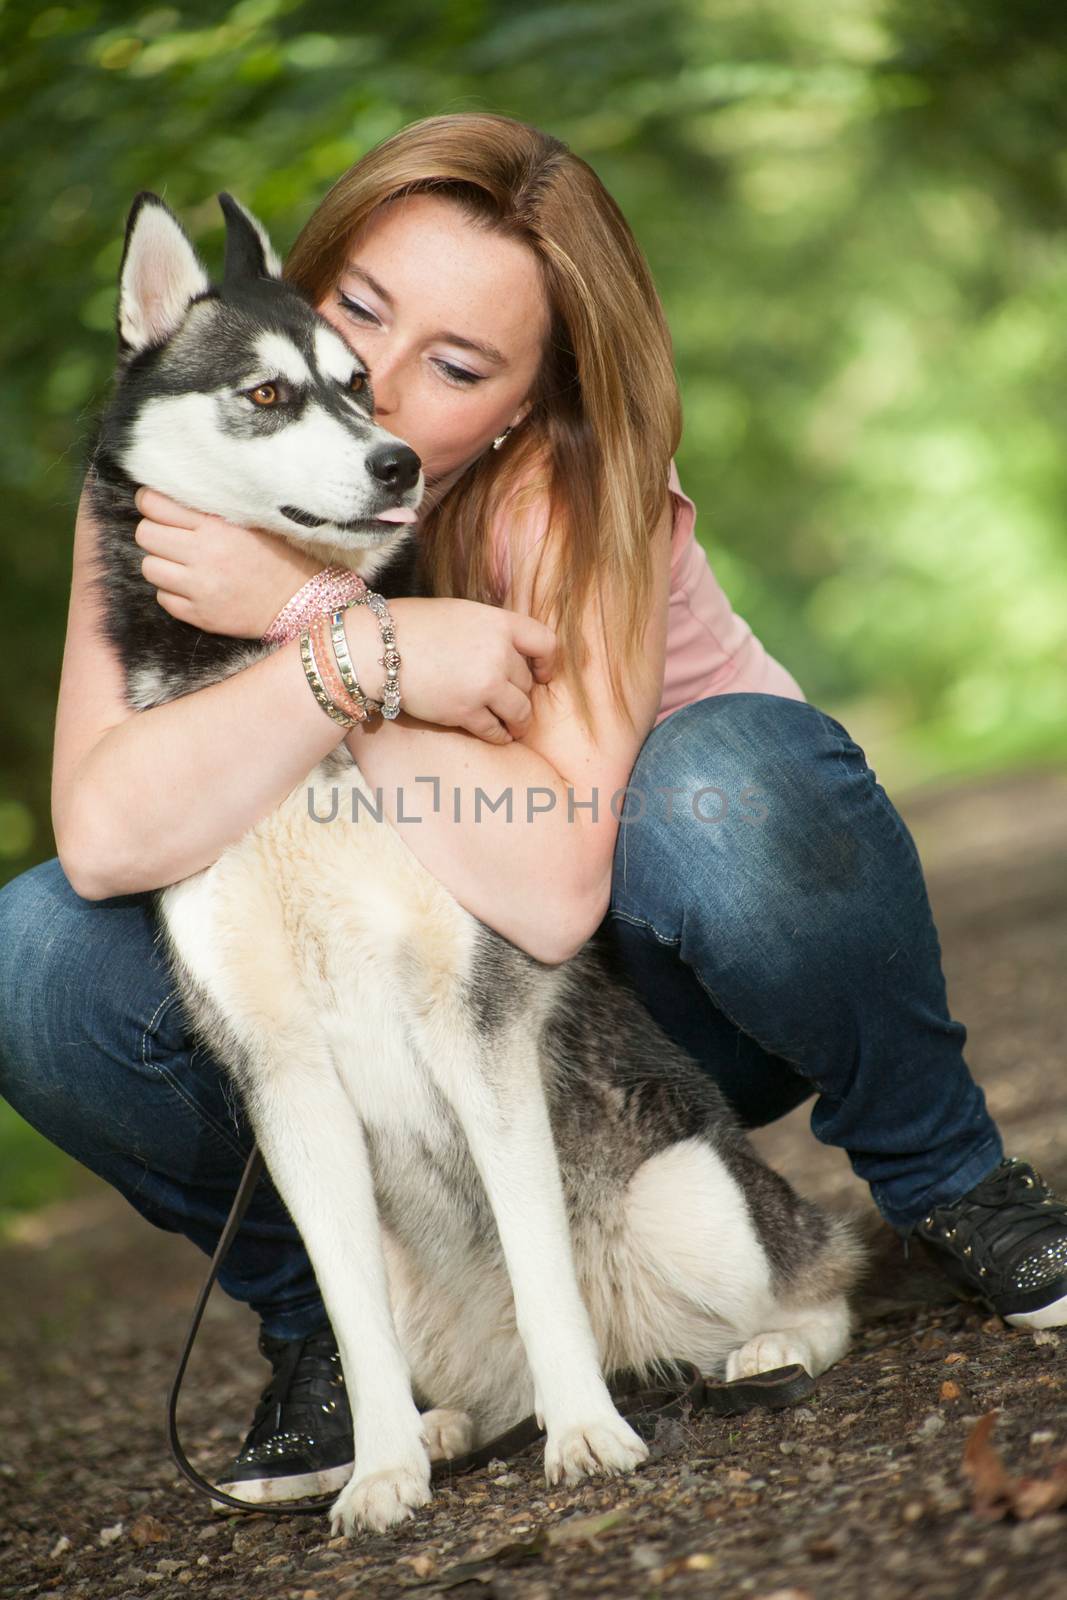 Hugging with her dog by DNFStyle